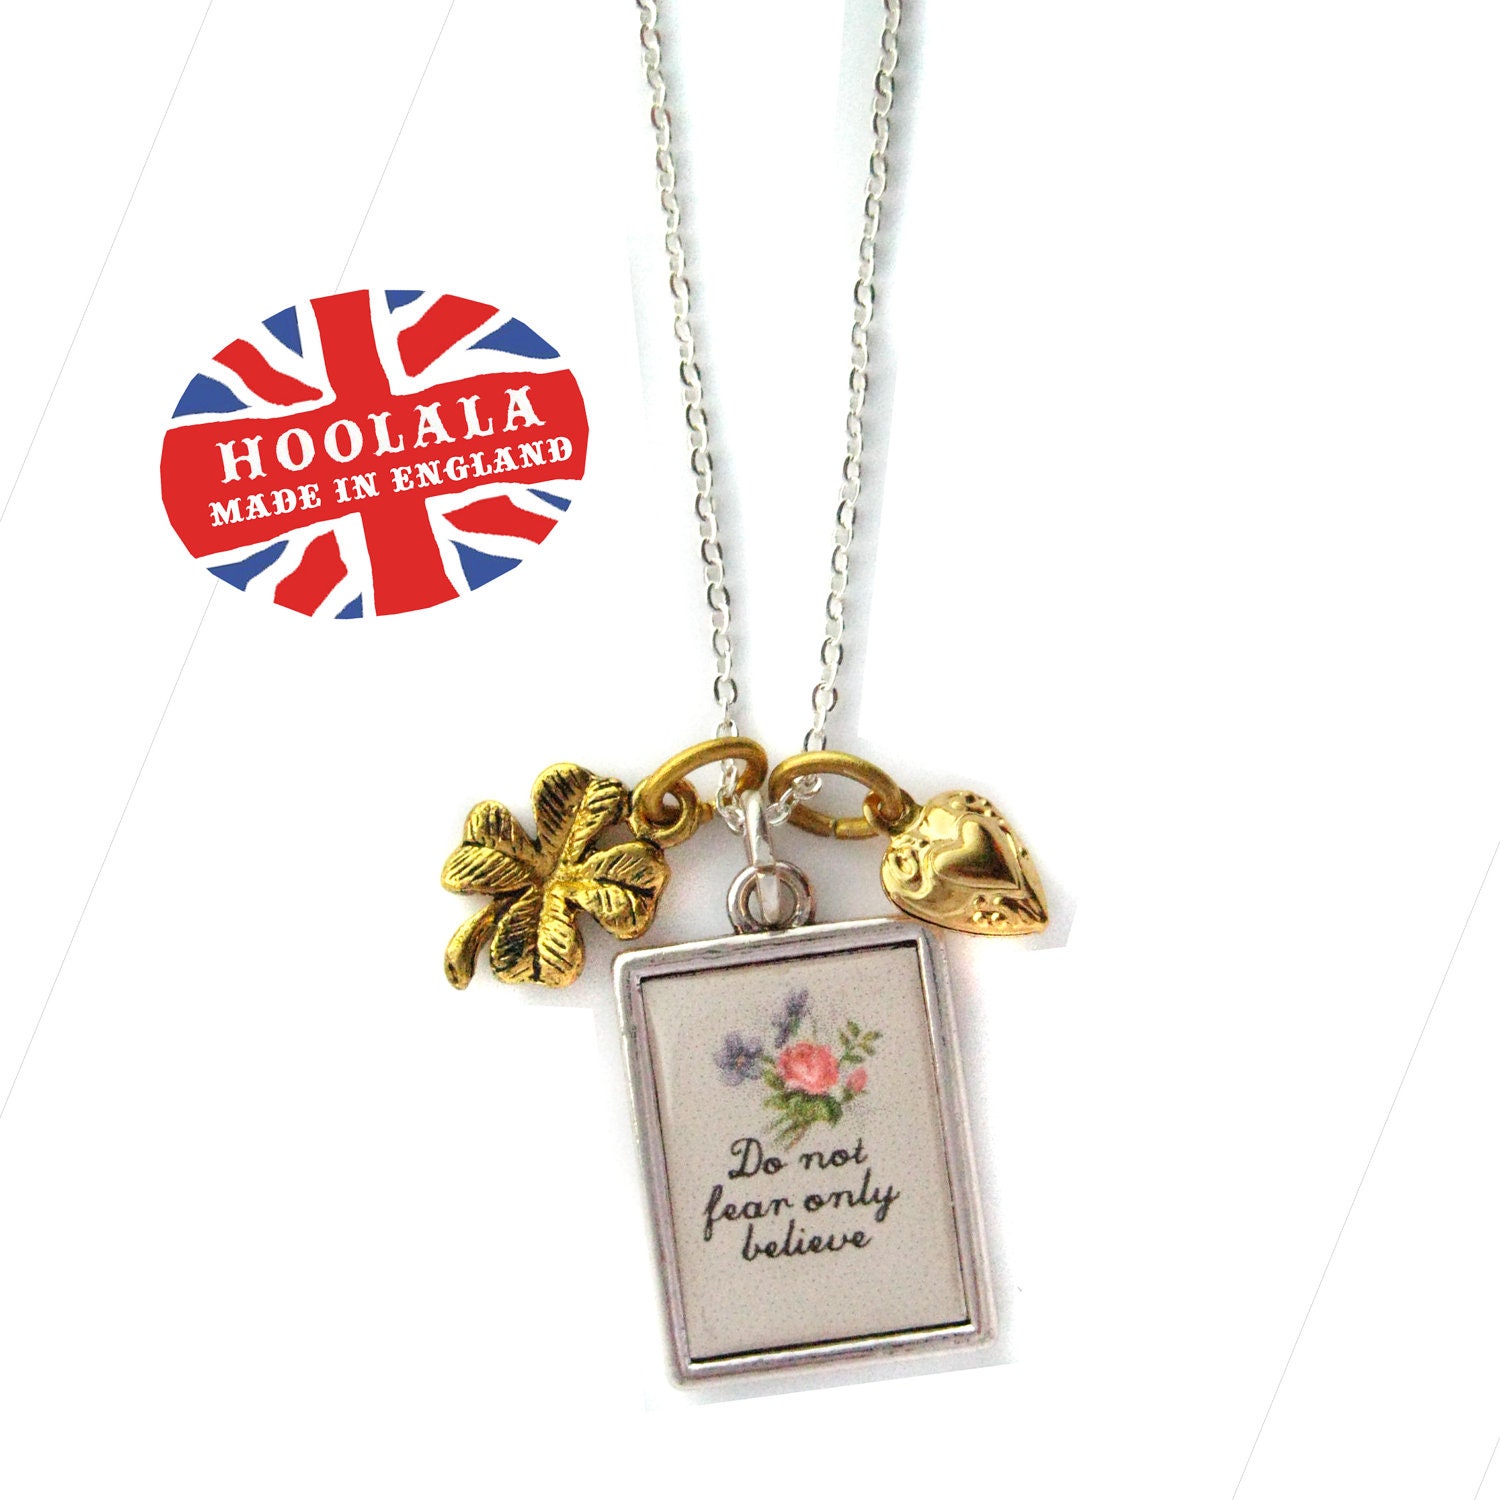 Do Not Fear Proverb Charms - Do Not Fear Only Believe  Charm Pendant Necklace from Hoolala